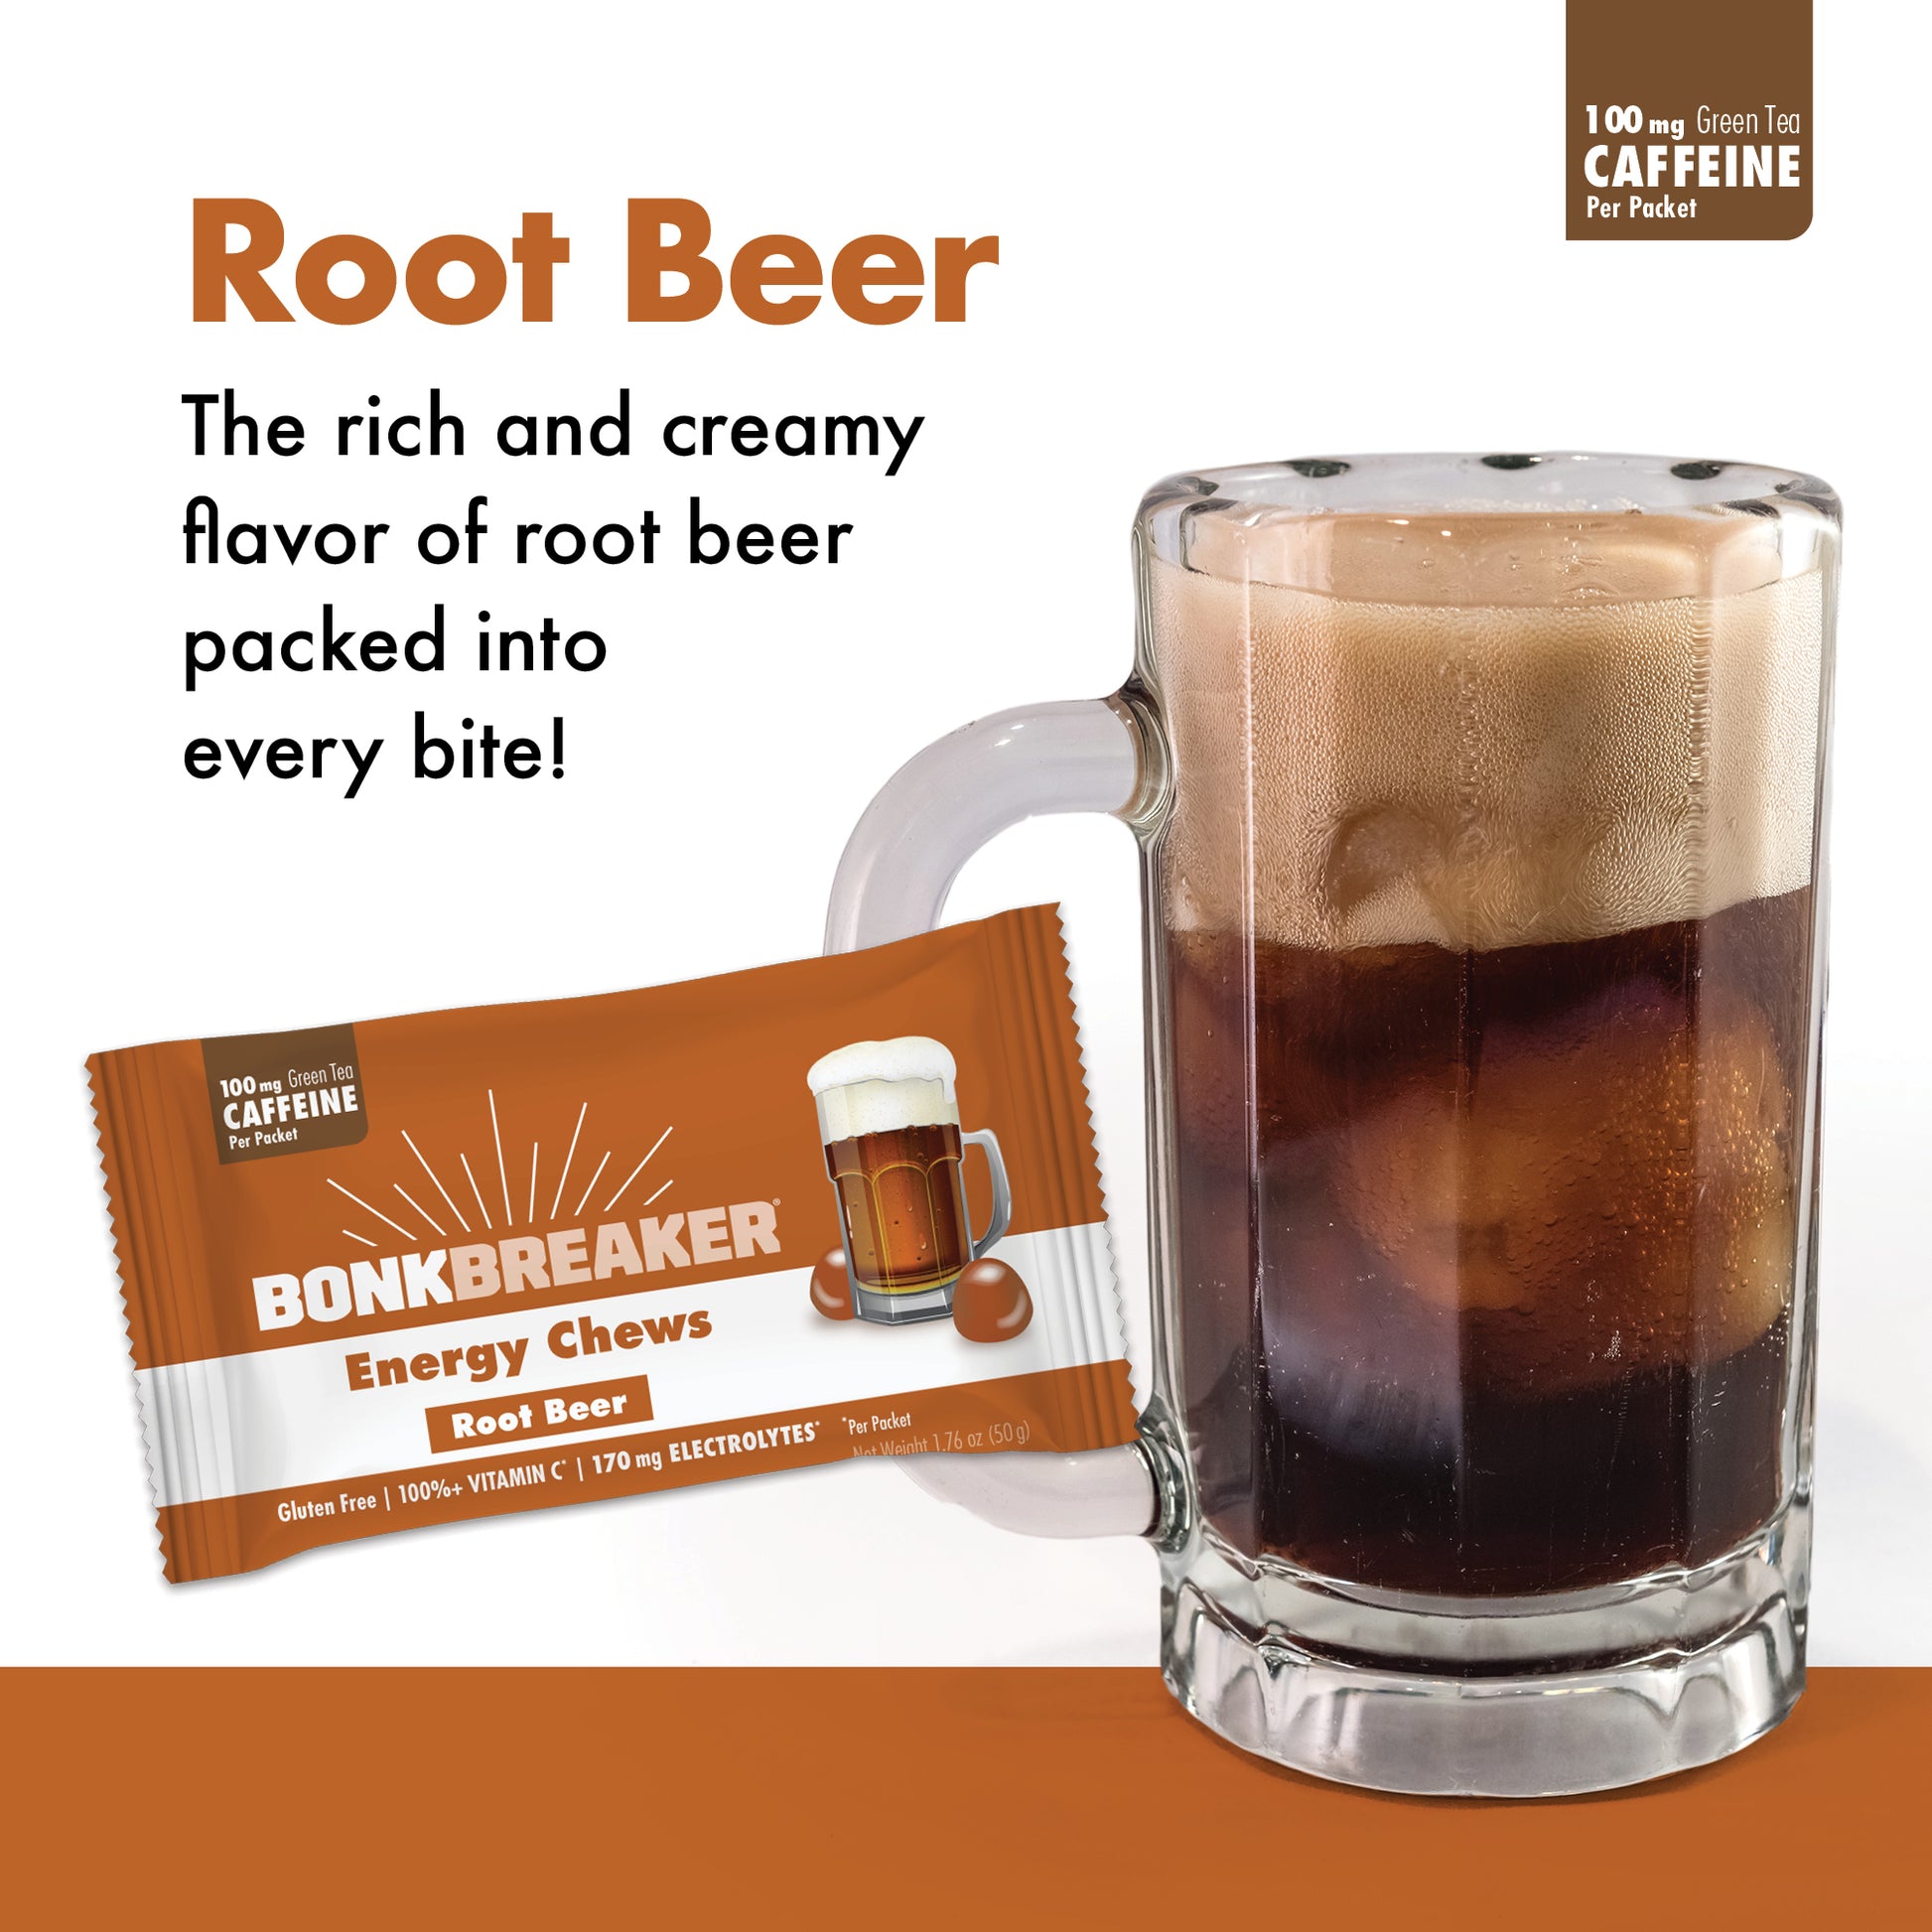 Root Beer - The rich and creamy flavor of root beer packed into every bite!